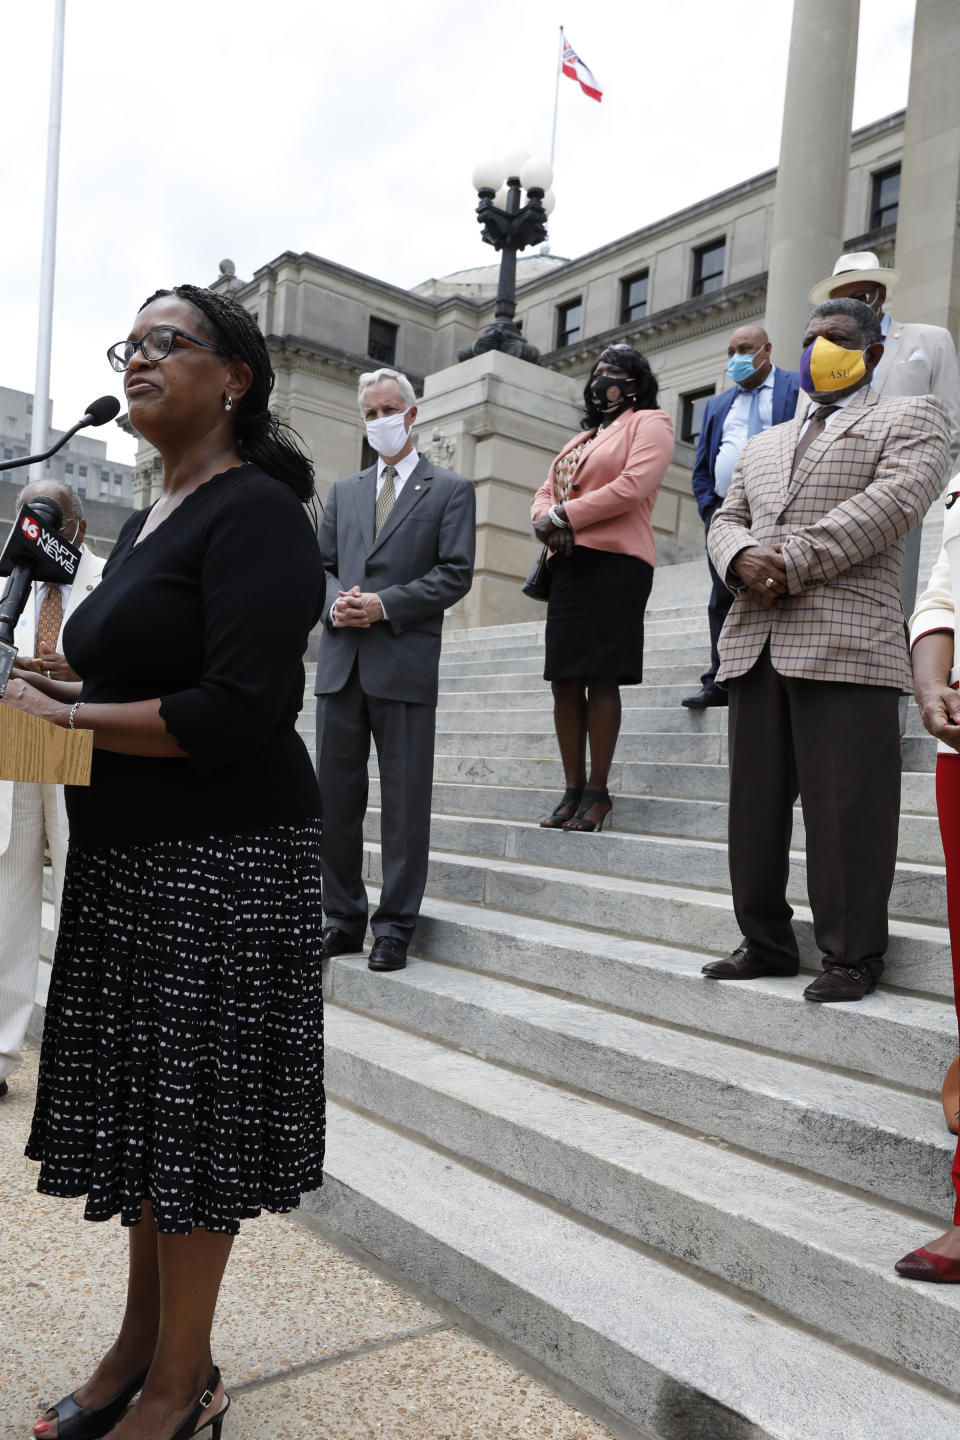 Sen. Angela Turner Ford, D-West Point, chairwoman of the Mississippi Legislative Black Caucus, left, expresses the group's approval of the passage by the Legislature of legislation to take down and replace the current state flag which contains the Confederate battle emblem, during a news conference at the Capitol in Jackson, Miss., Monday, June 29, 2020. (AP Photo/Rogelio V. Solis)